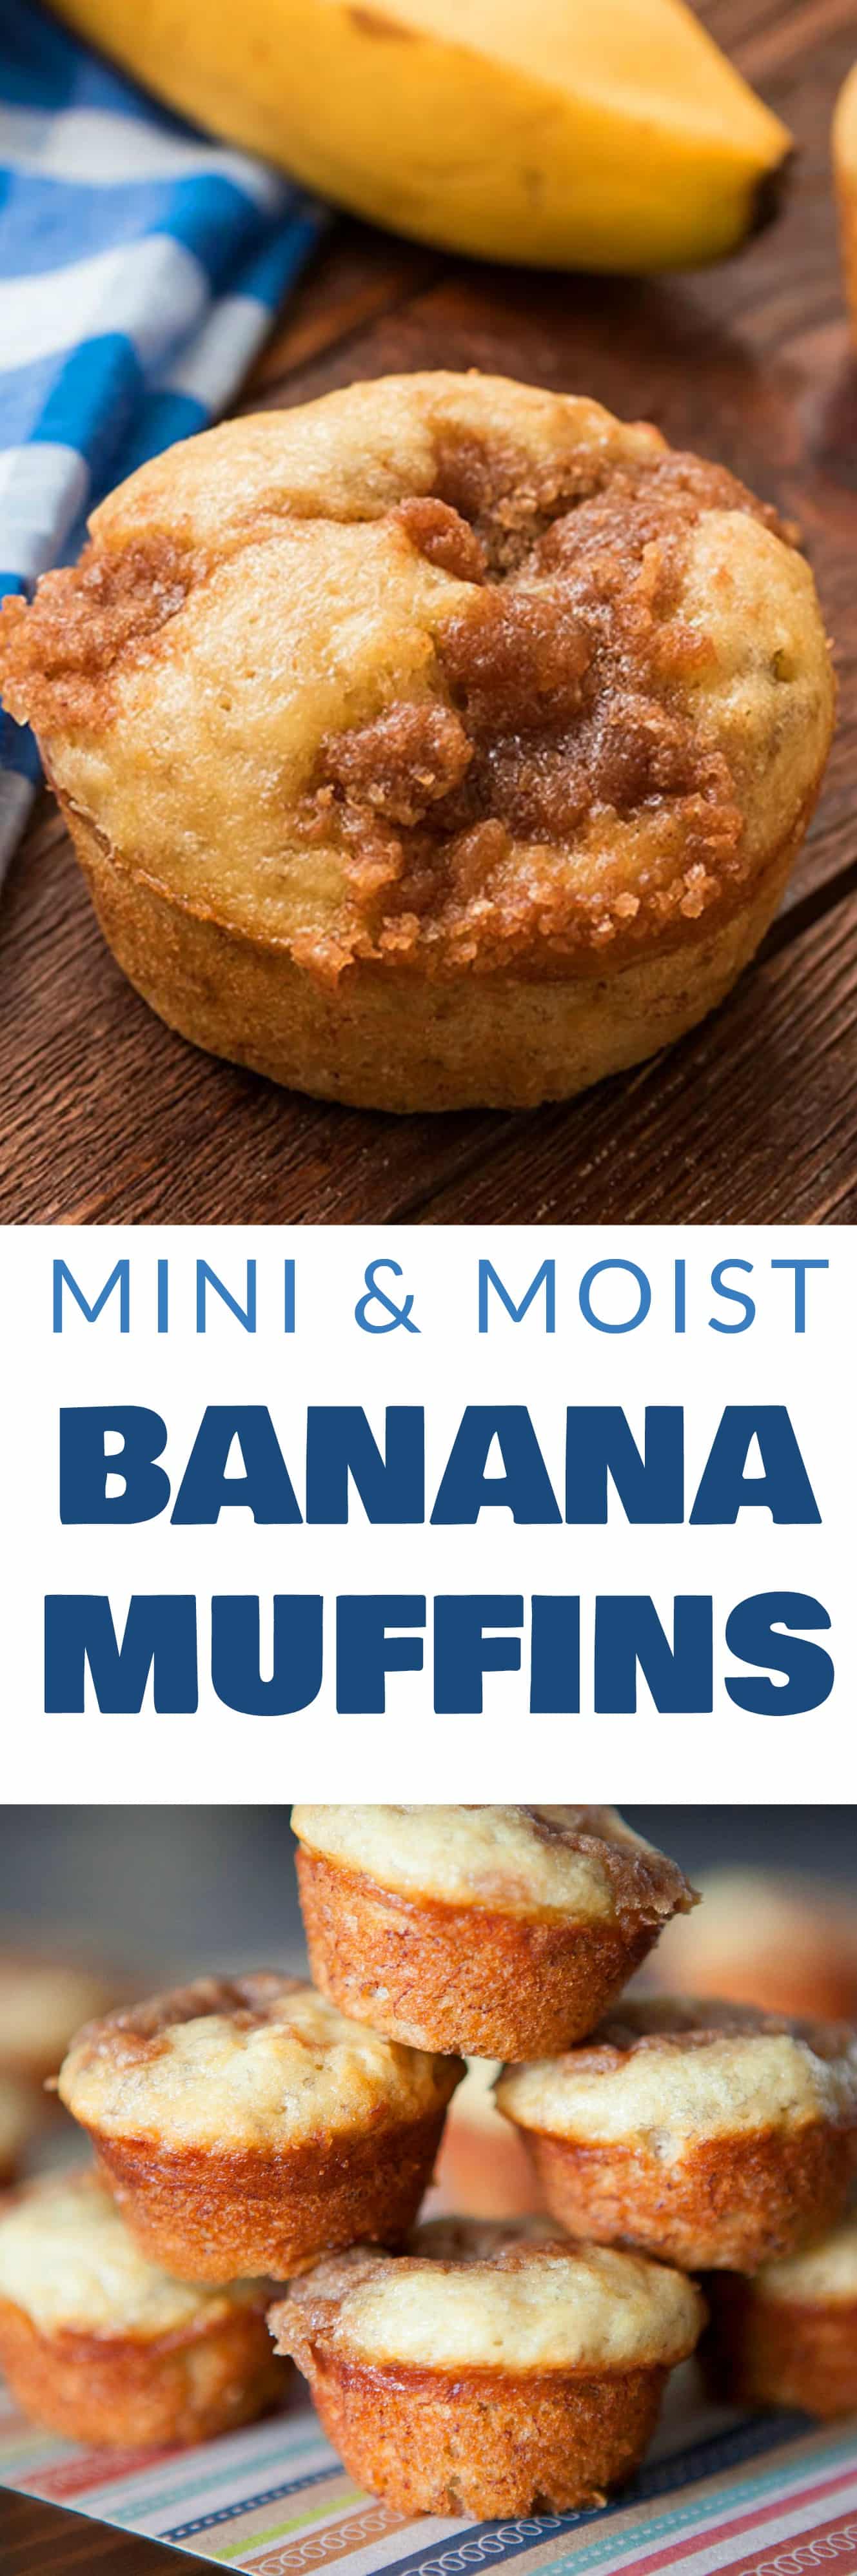 These MINI and MOIST Banana Muffins with crumb topping are the most delicious banana muffins you'll ever taste! Since they're mini, they're great for a healthy breakfast on the go! This banana muffin recipe has been made thousands of times - find out why these banana muffins are the BEST and MOST POPULAR!  